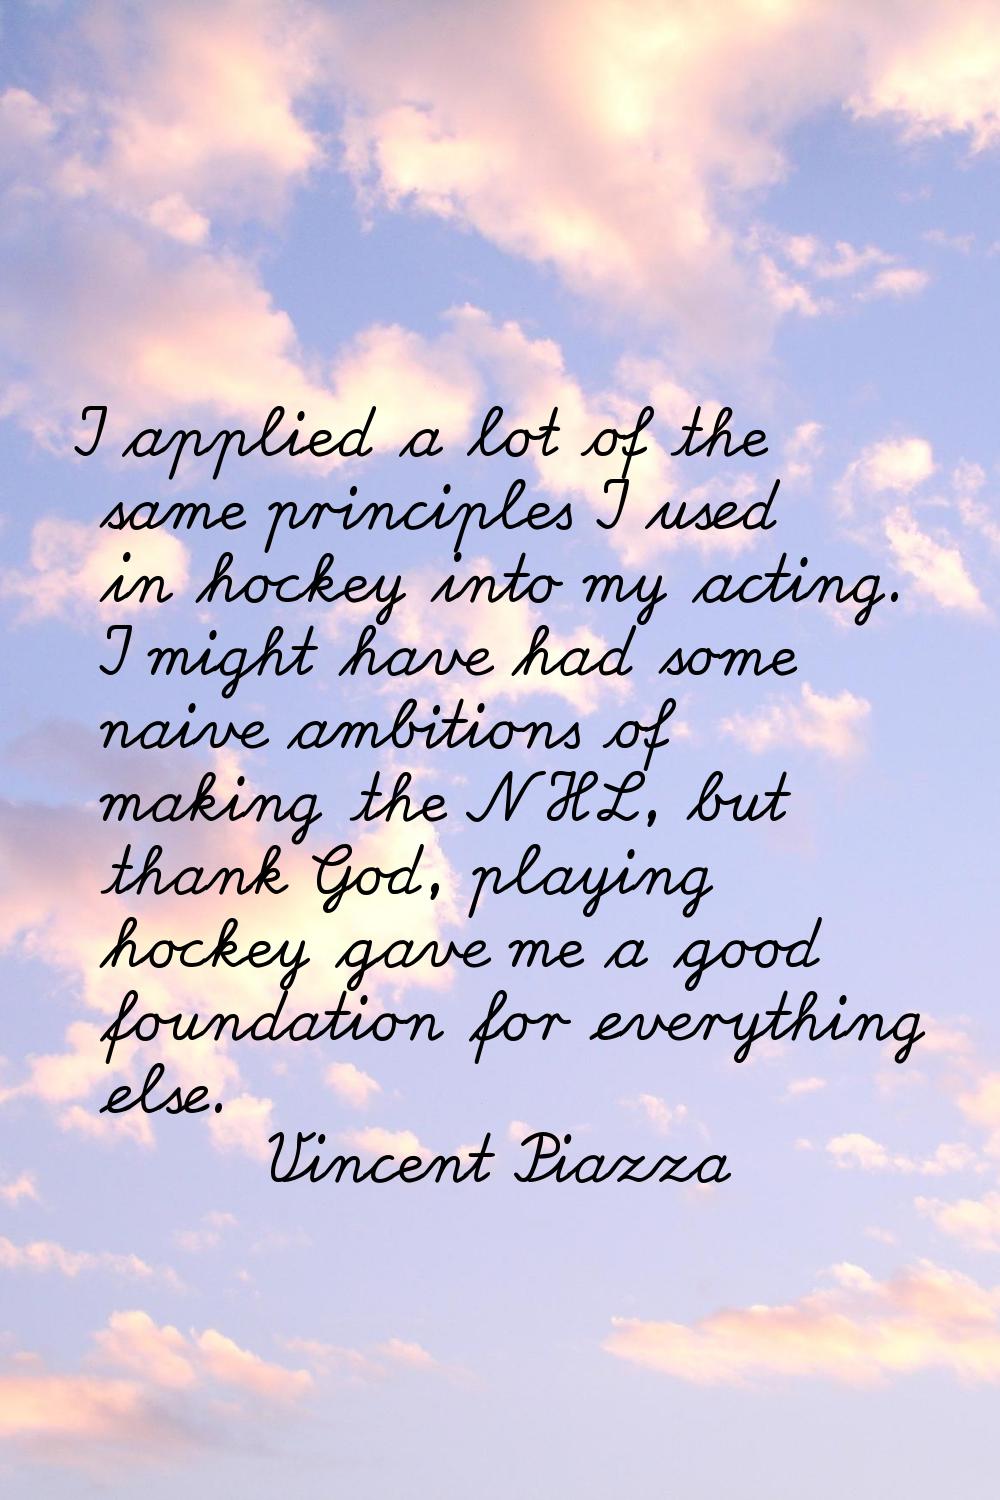 I applied a lot of the same principles I used in hockey into my acting. I might have had some naive